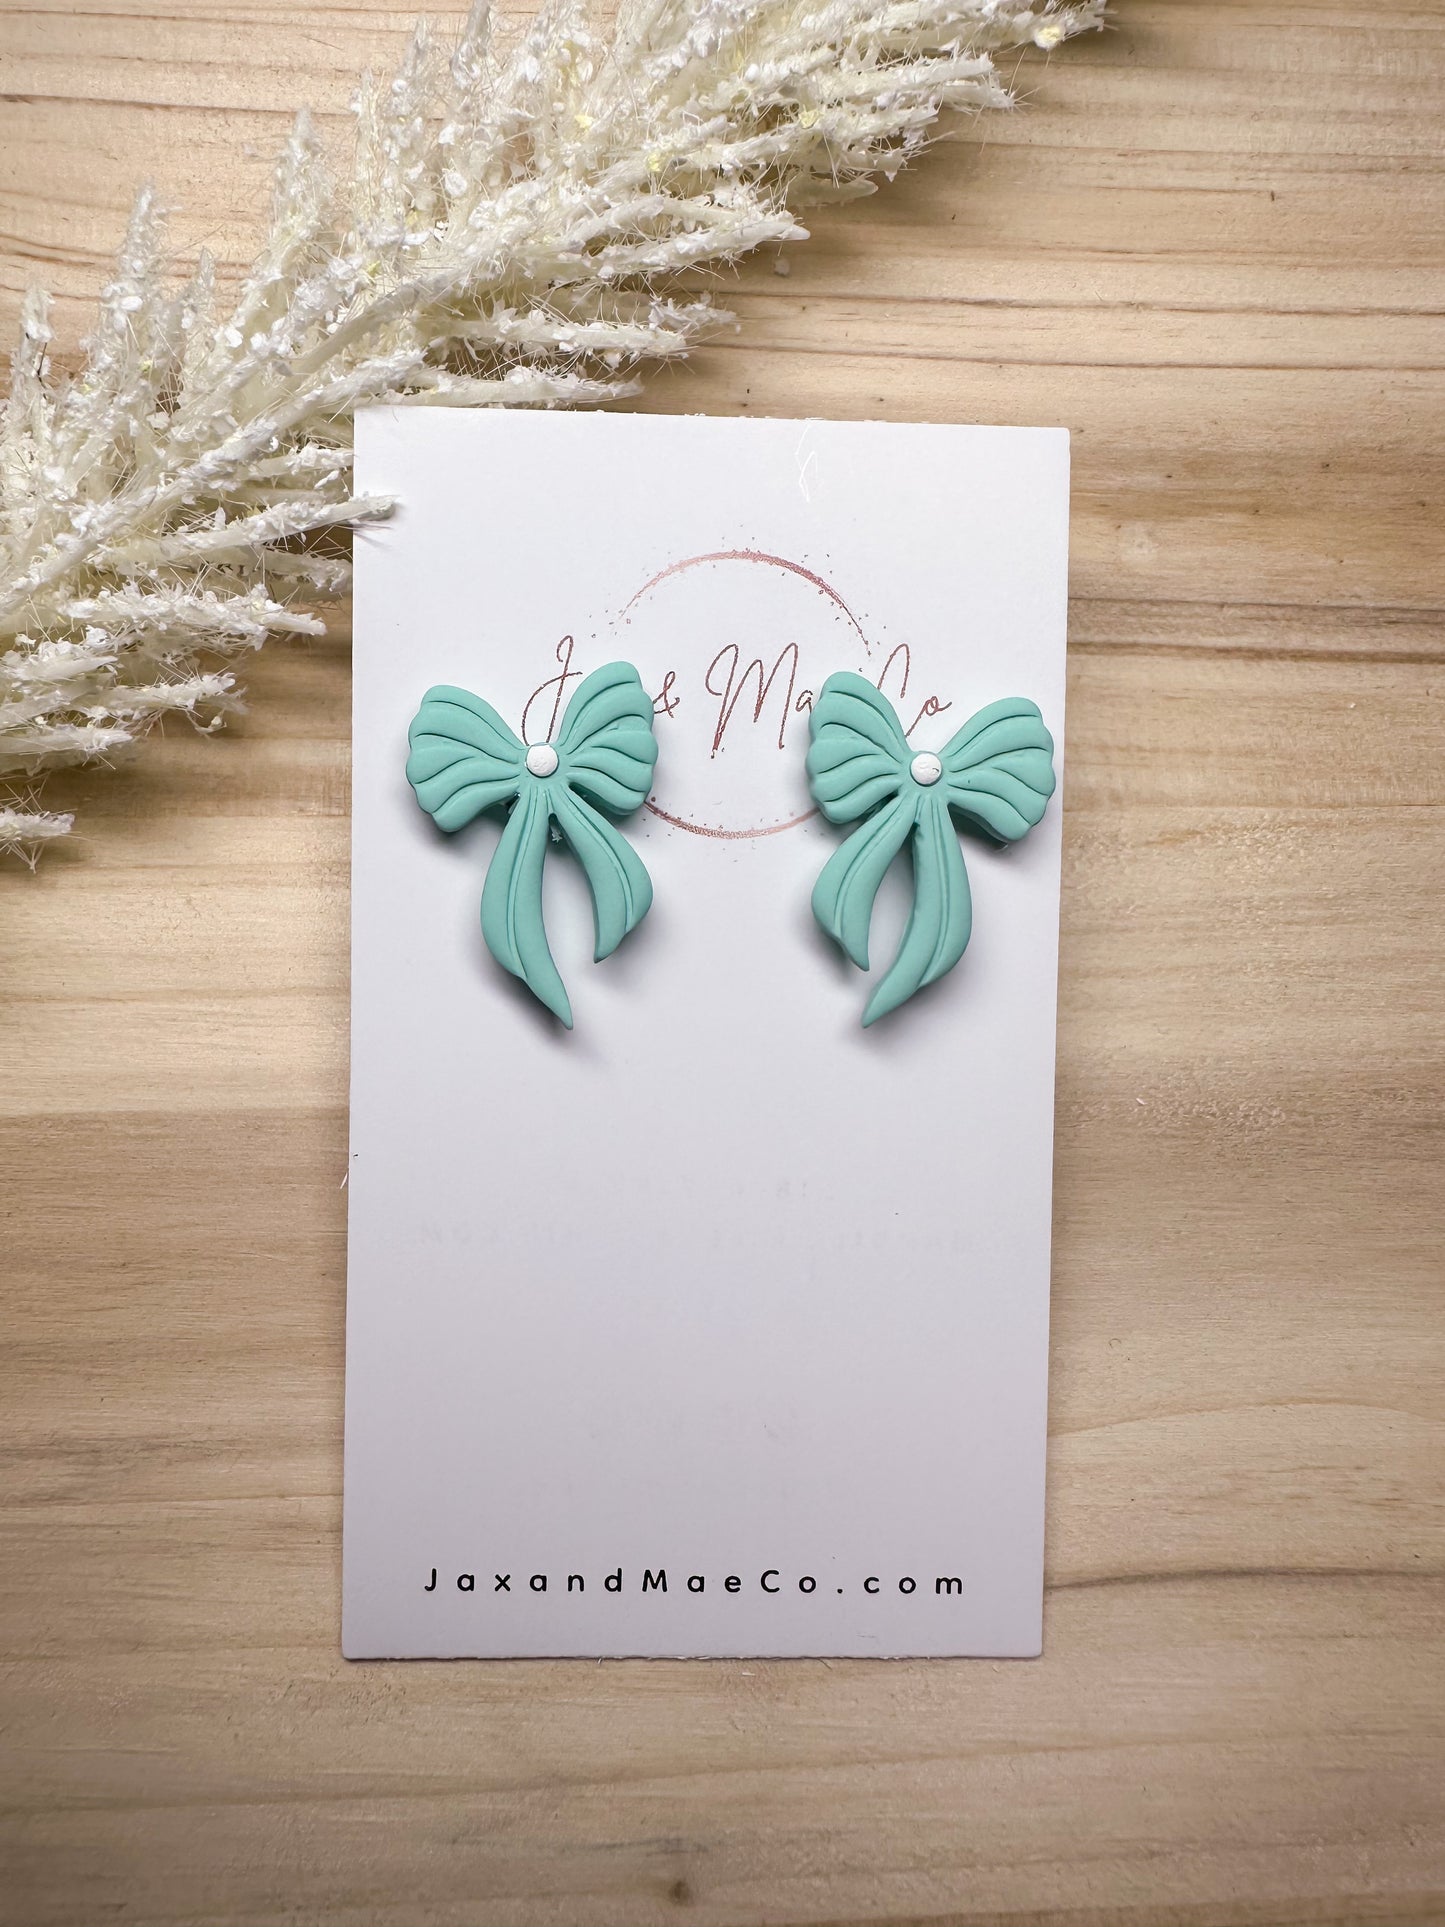 Bows - teal/mint